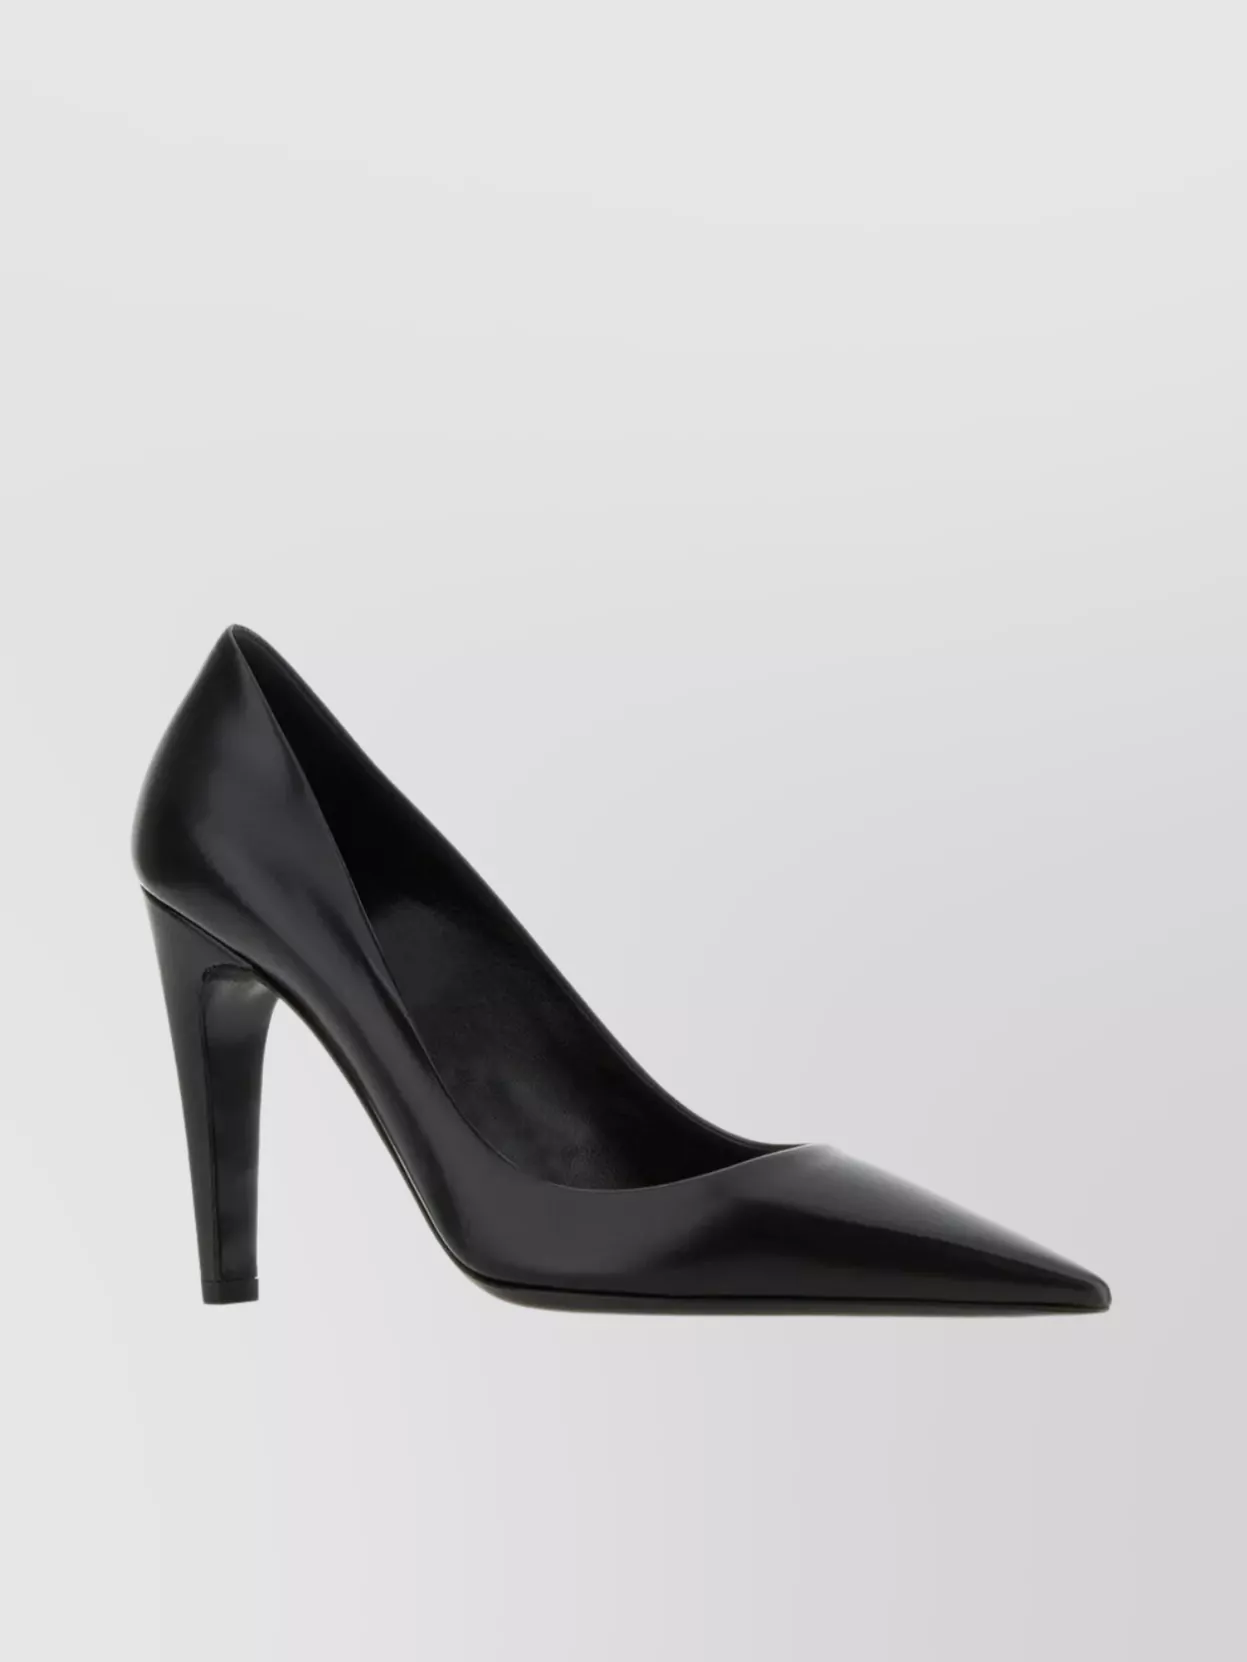 Shop Prada Leather Pumps With Italian Heel And Pointed Toe